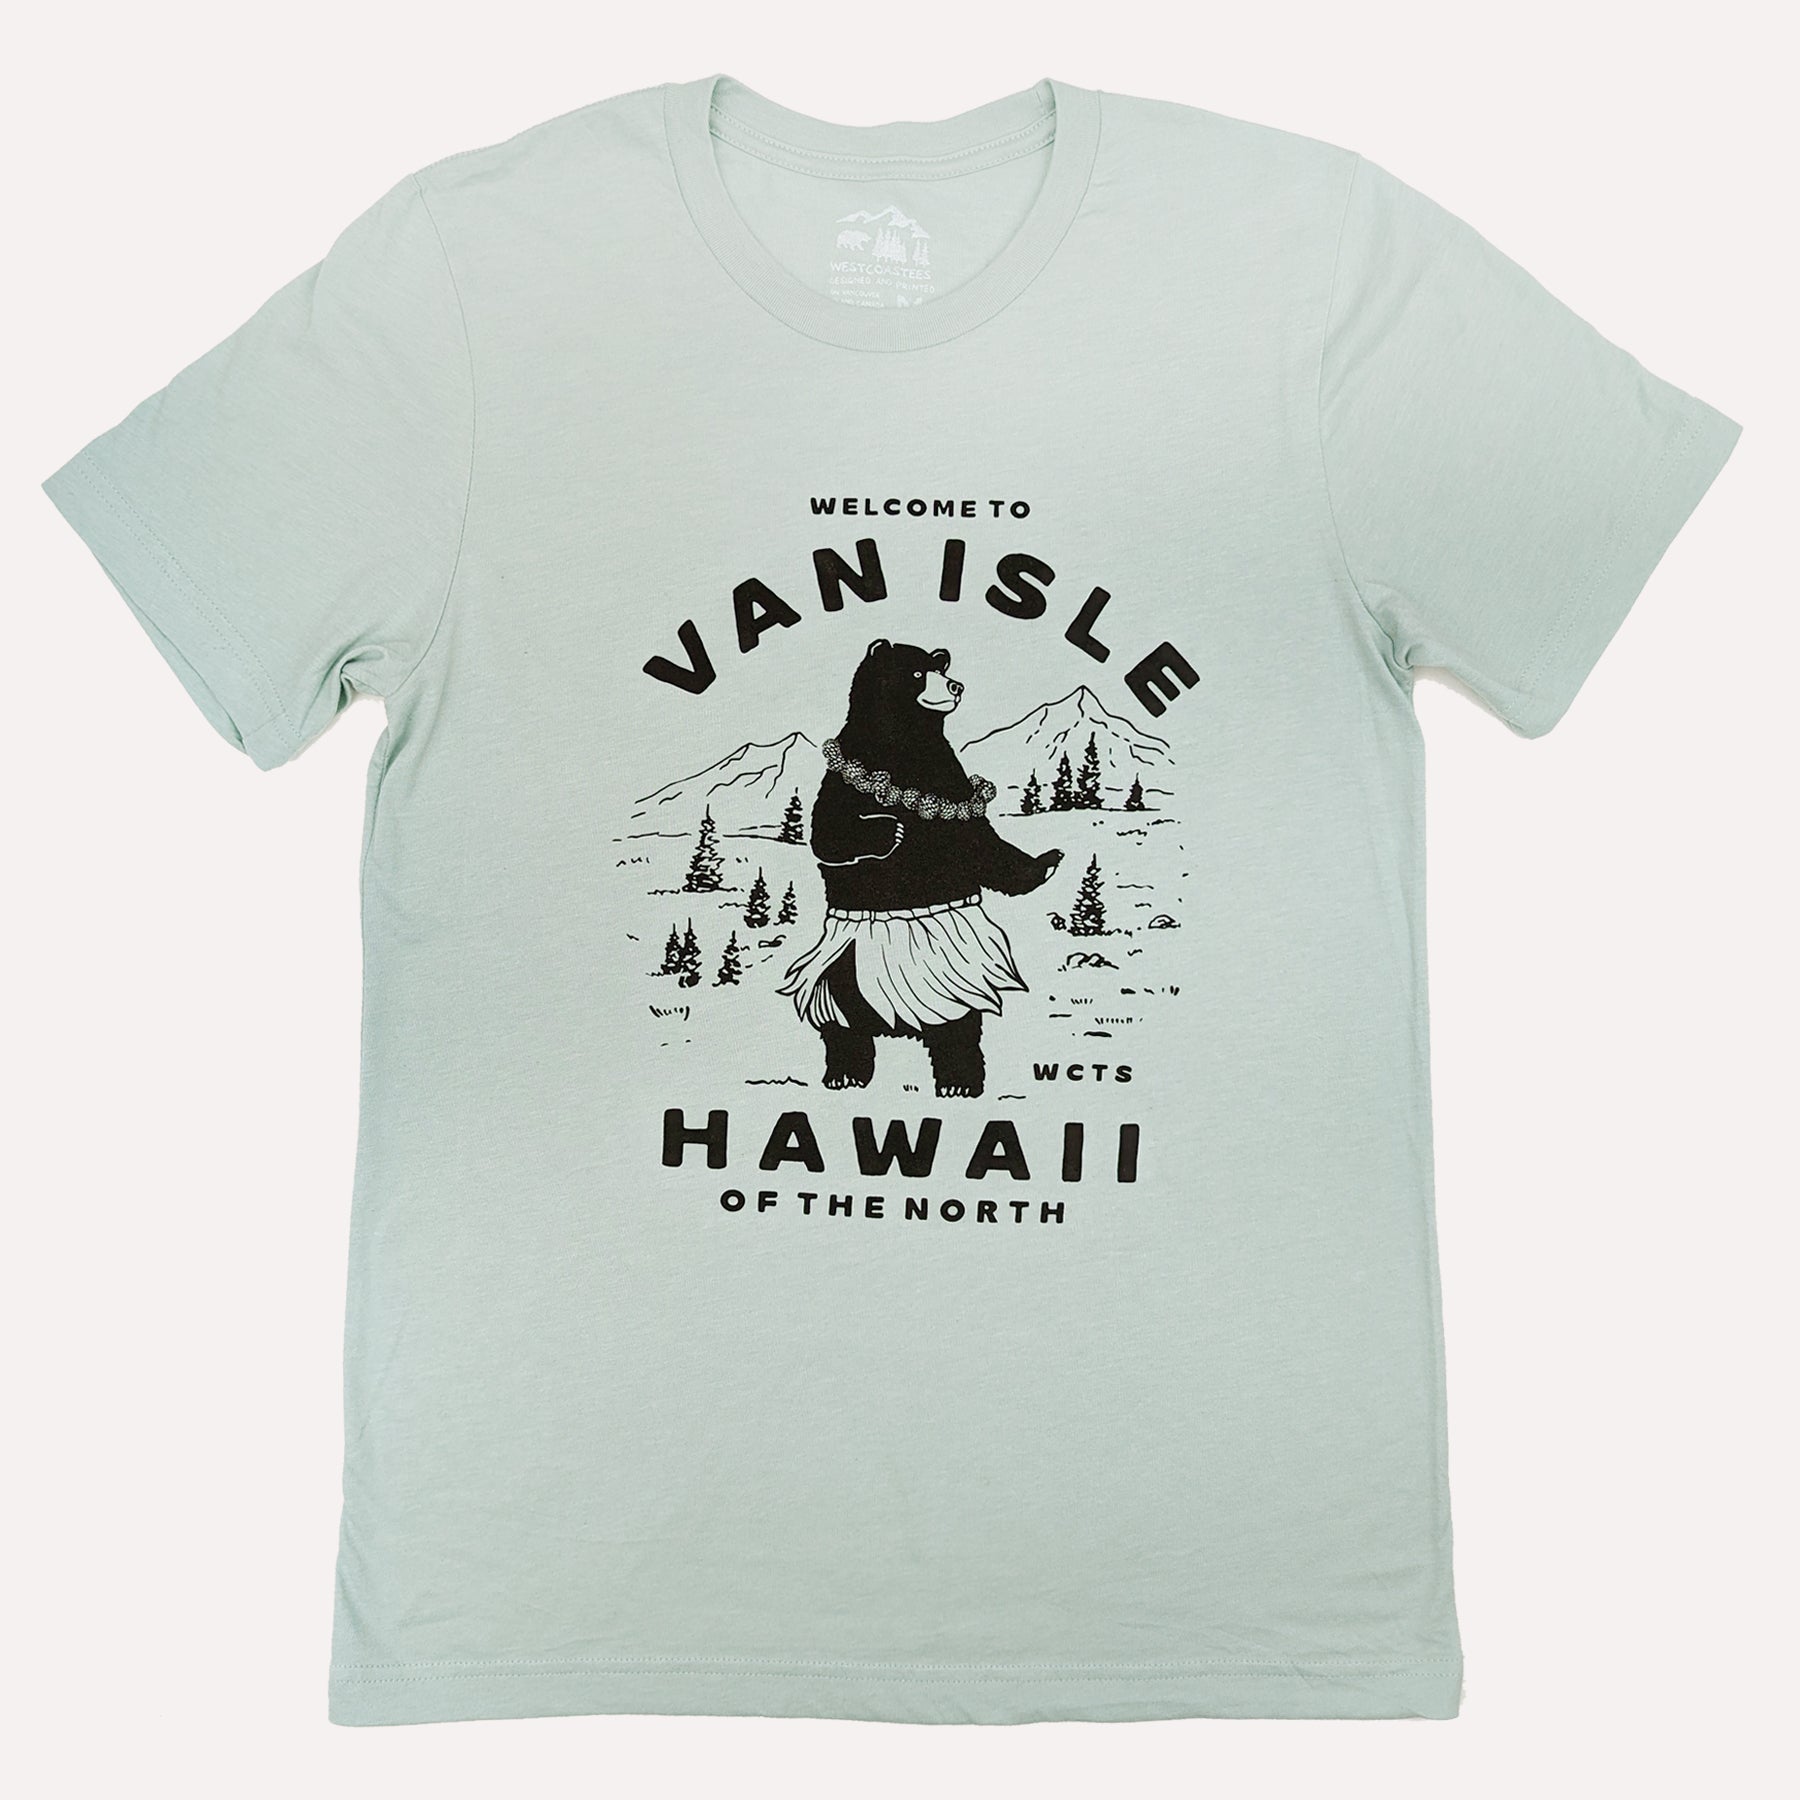 Hawaii of the North Unisex T-shirt